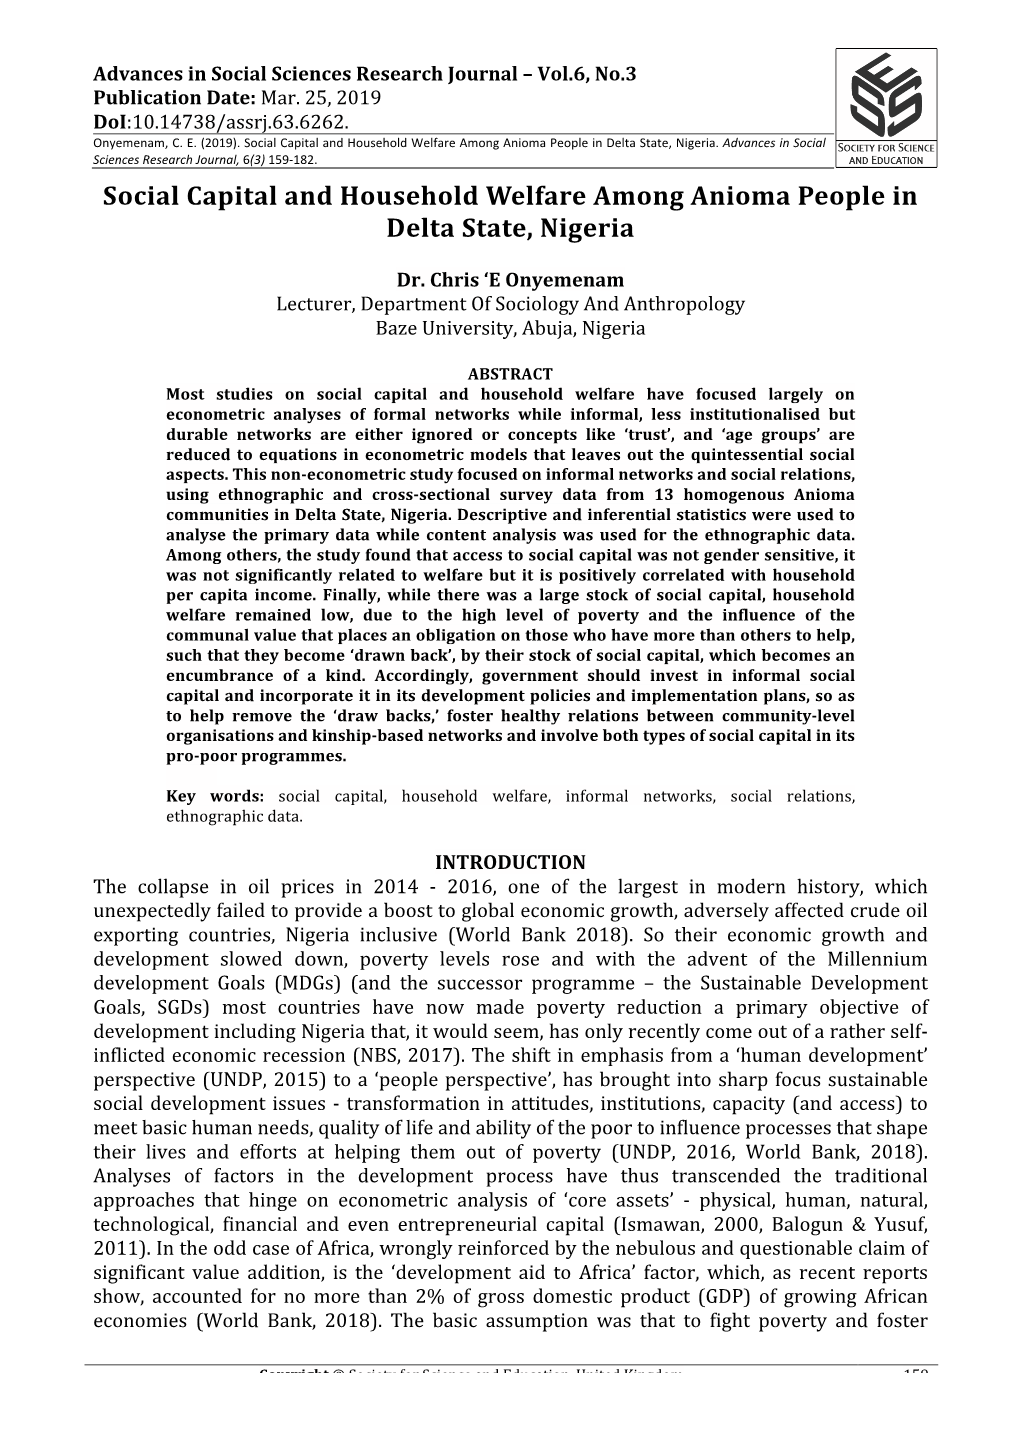 Social Capital and Household Welfare Among Anioma People in Delta State, Nigeria